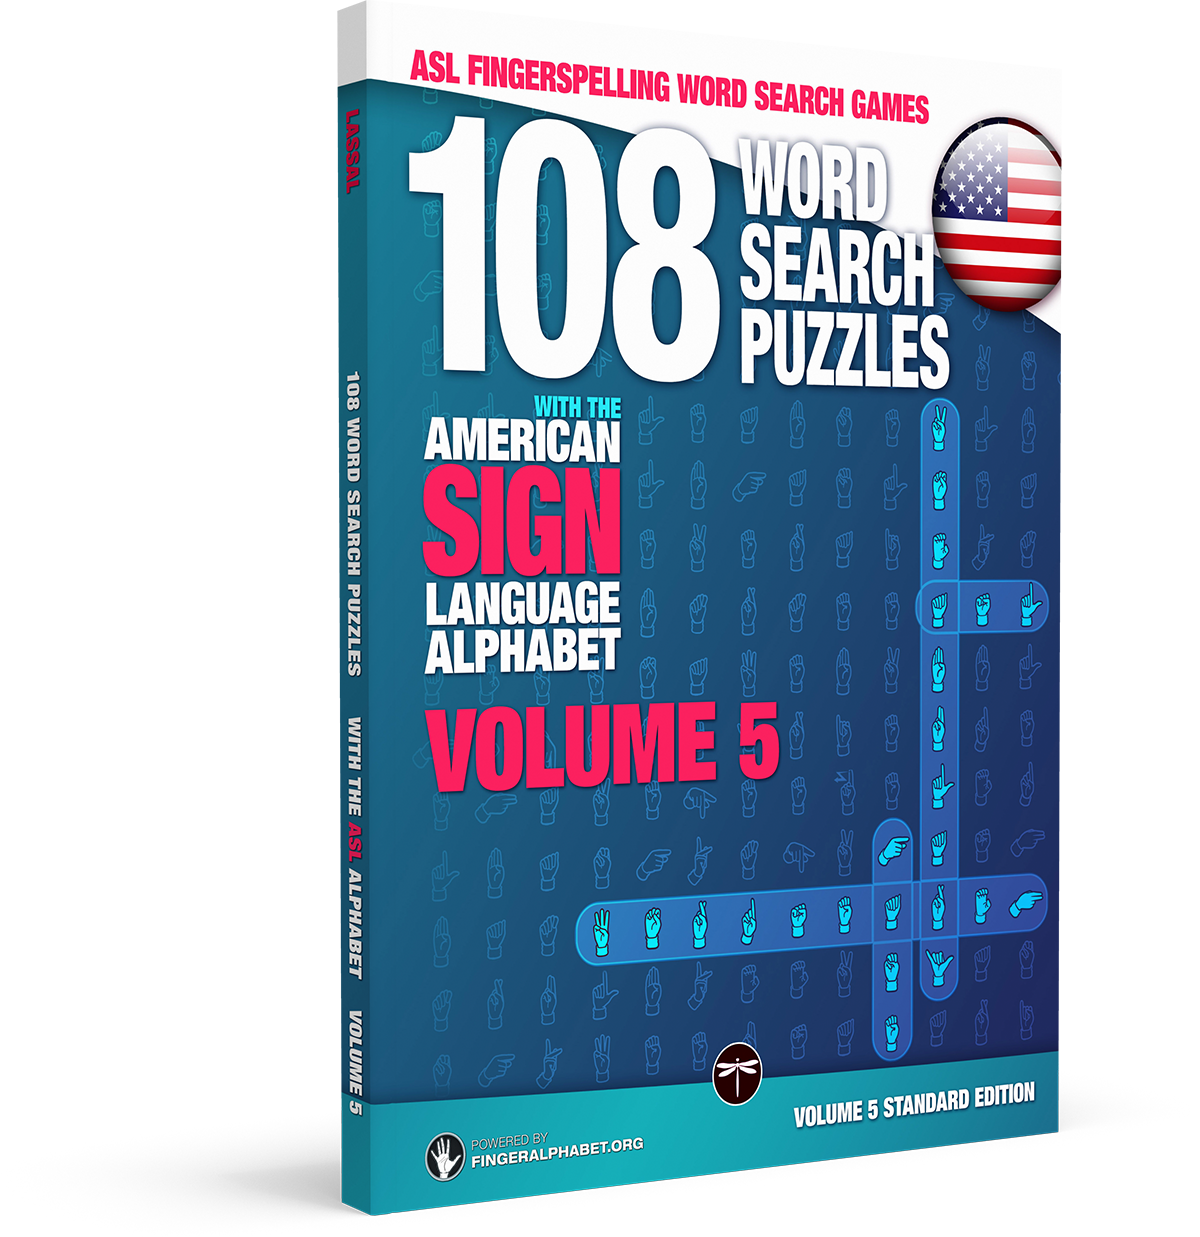 108 Word Search Puzzles with The American Sign Language Alphabet: Vol 5 Standard Edition